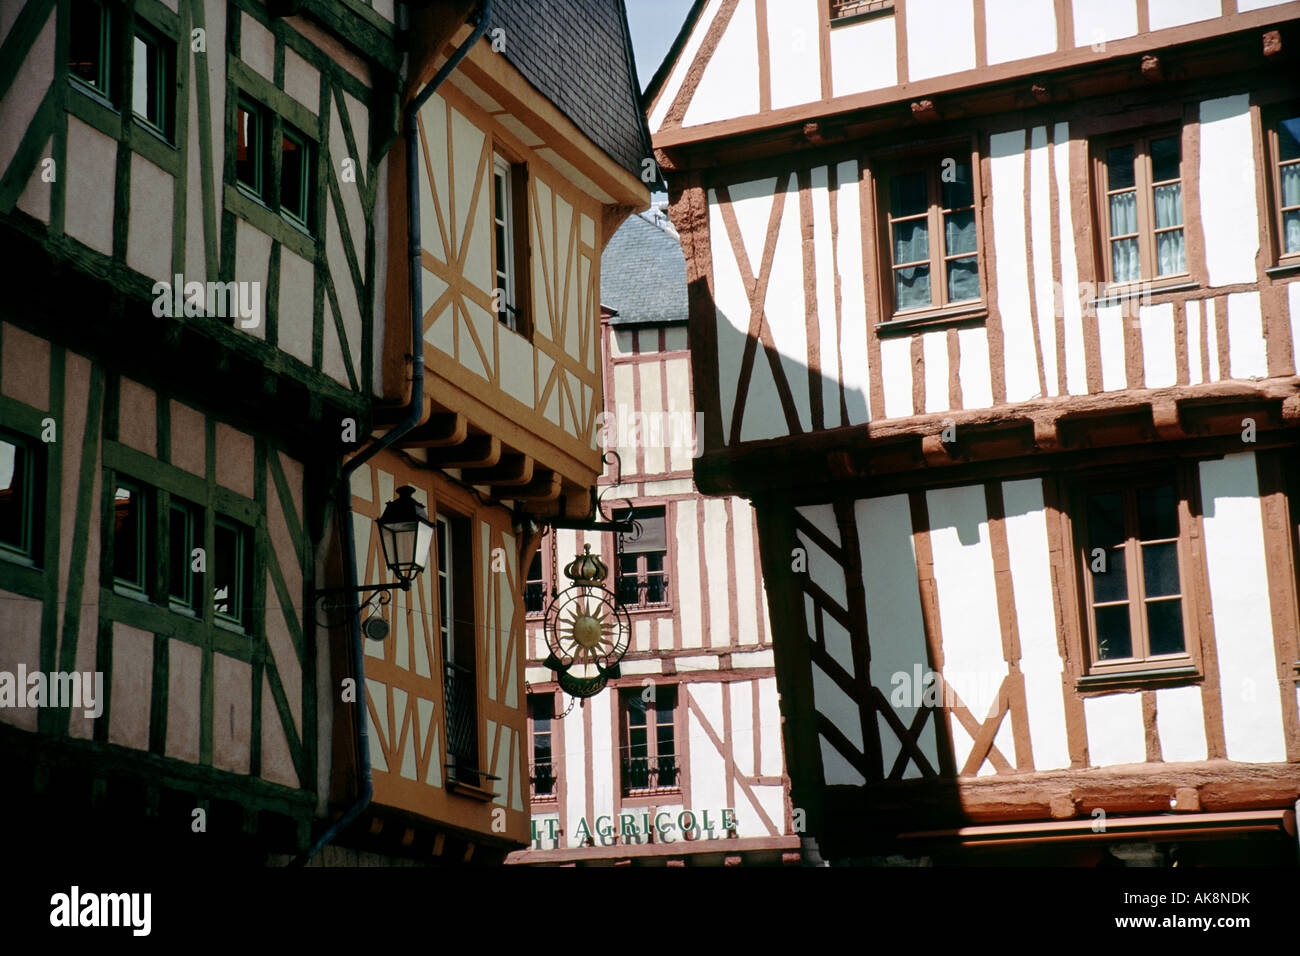 Old timbered buildings in Vannes, France Stock Photo